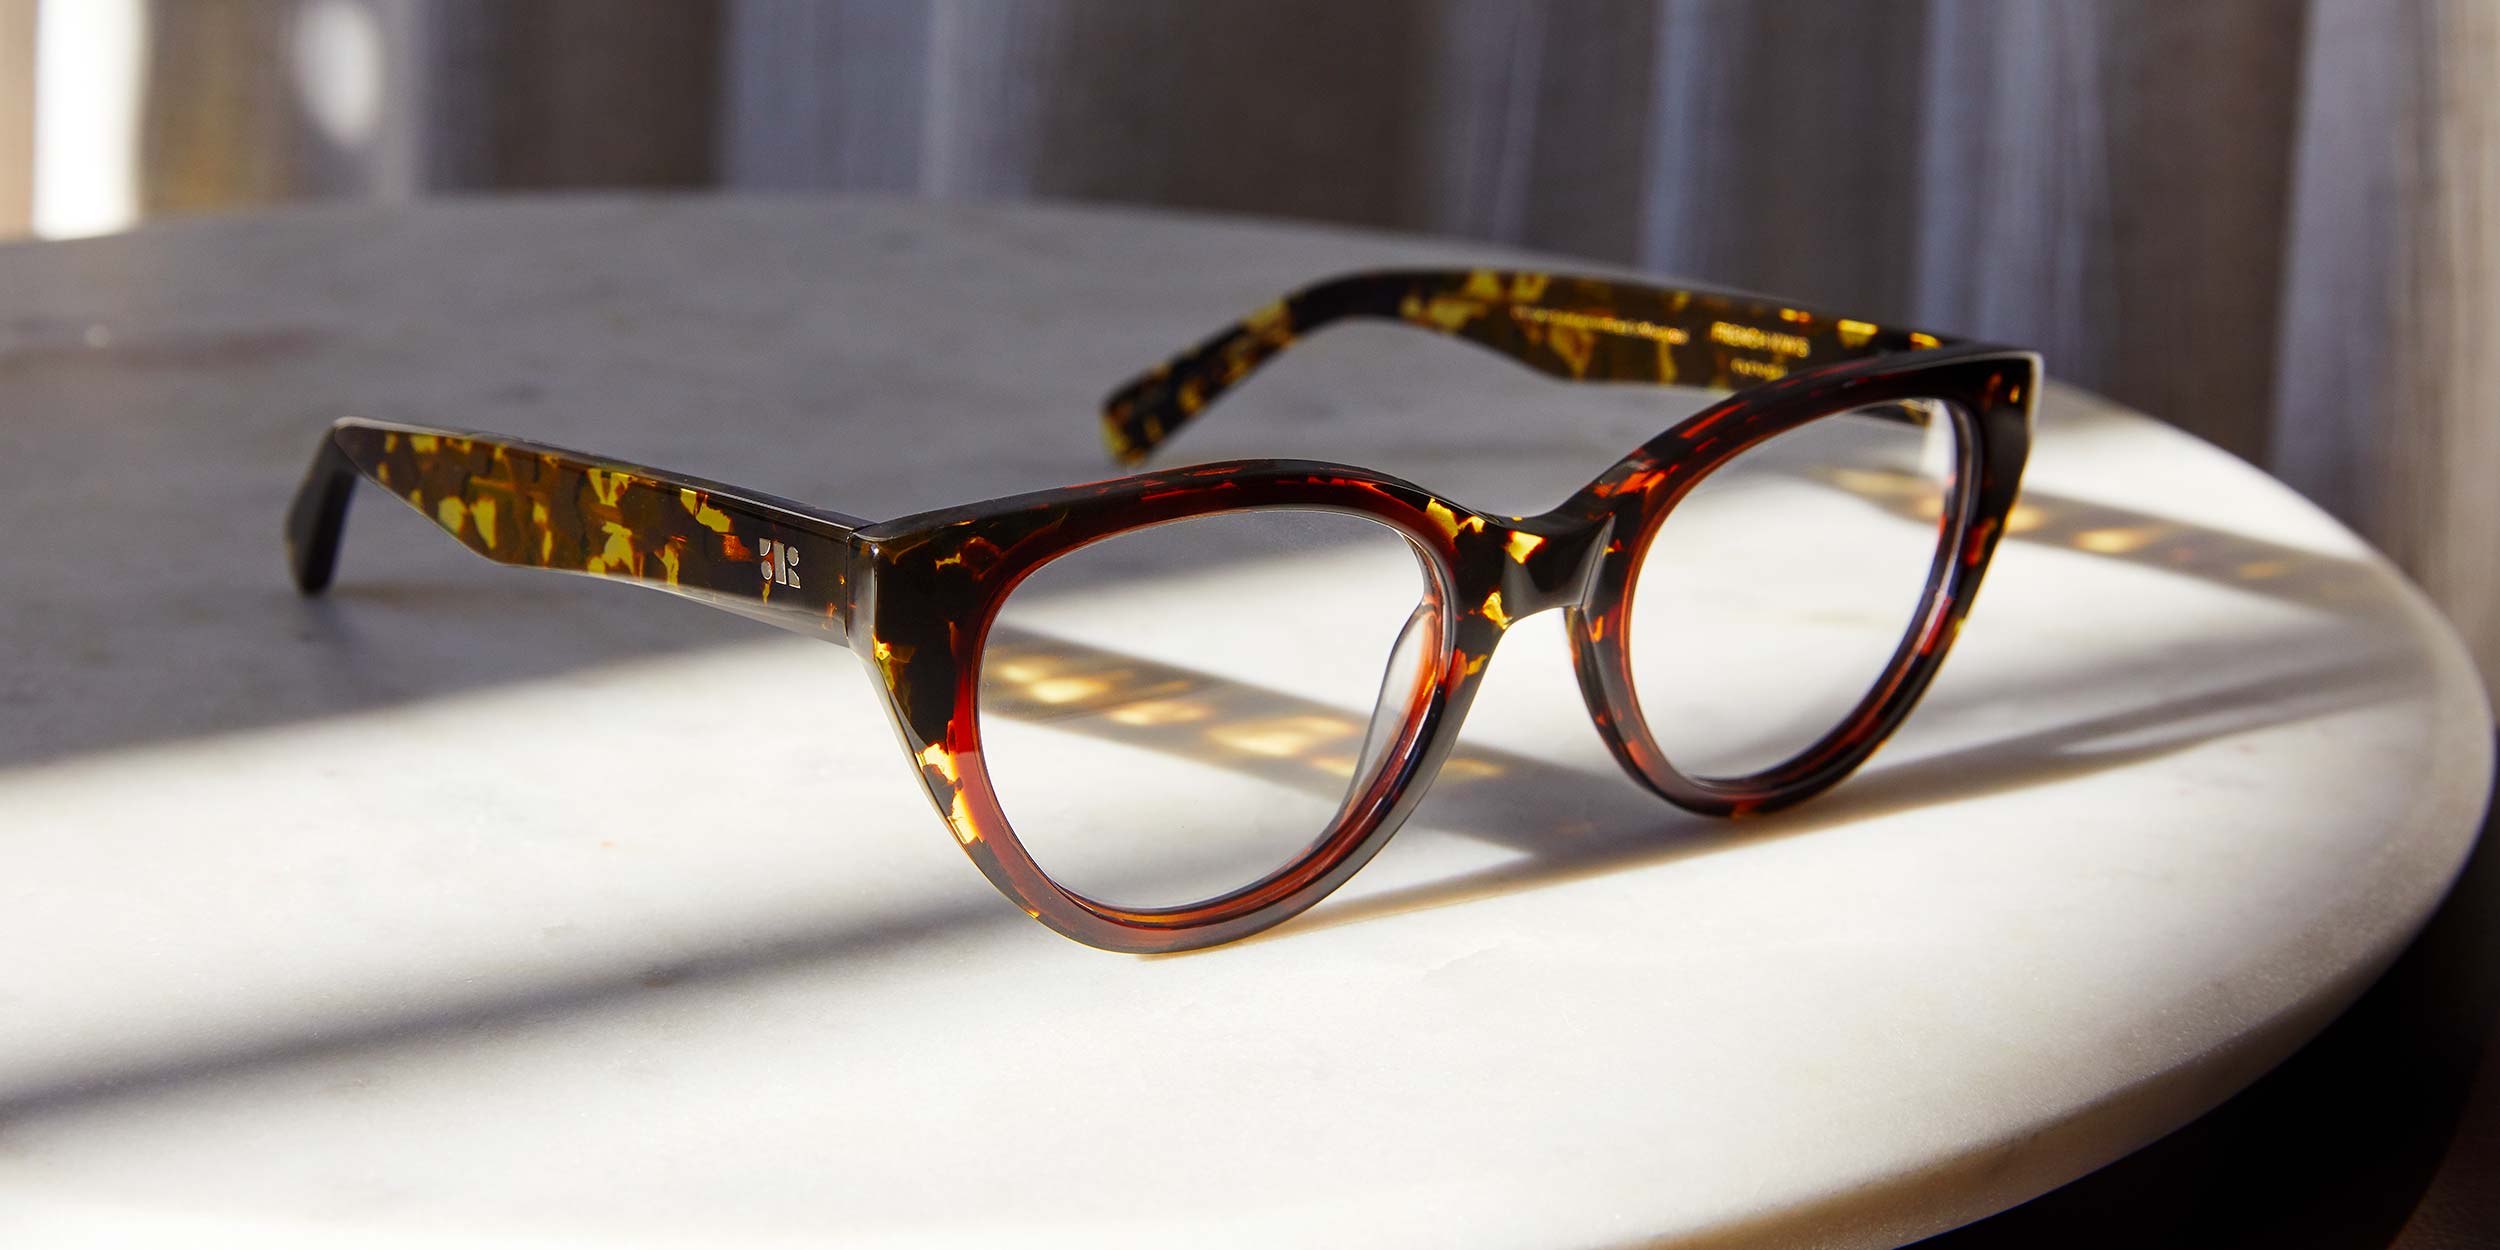 Photo Details of Colette Nude & Tortoise Reading Glasses in a room